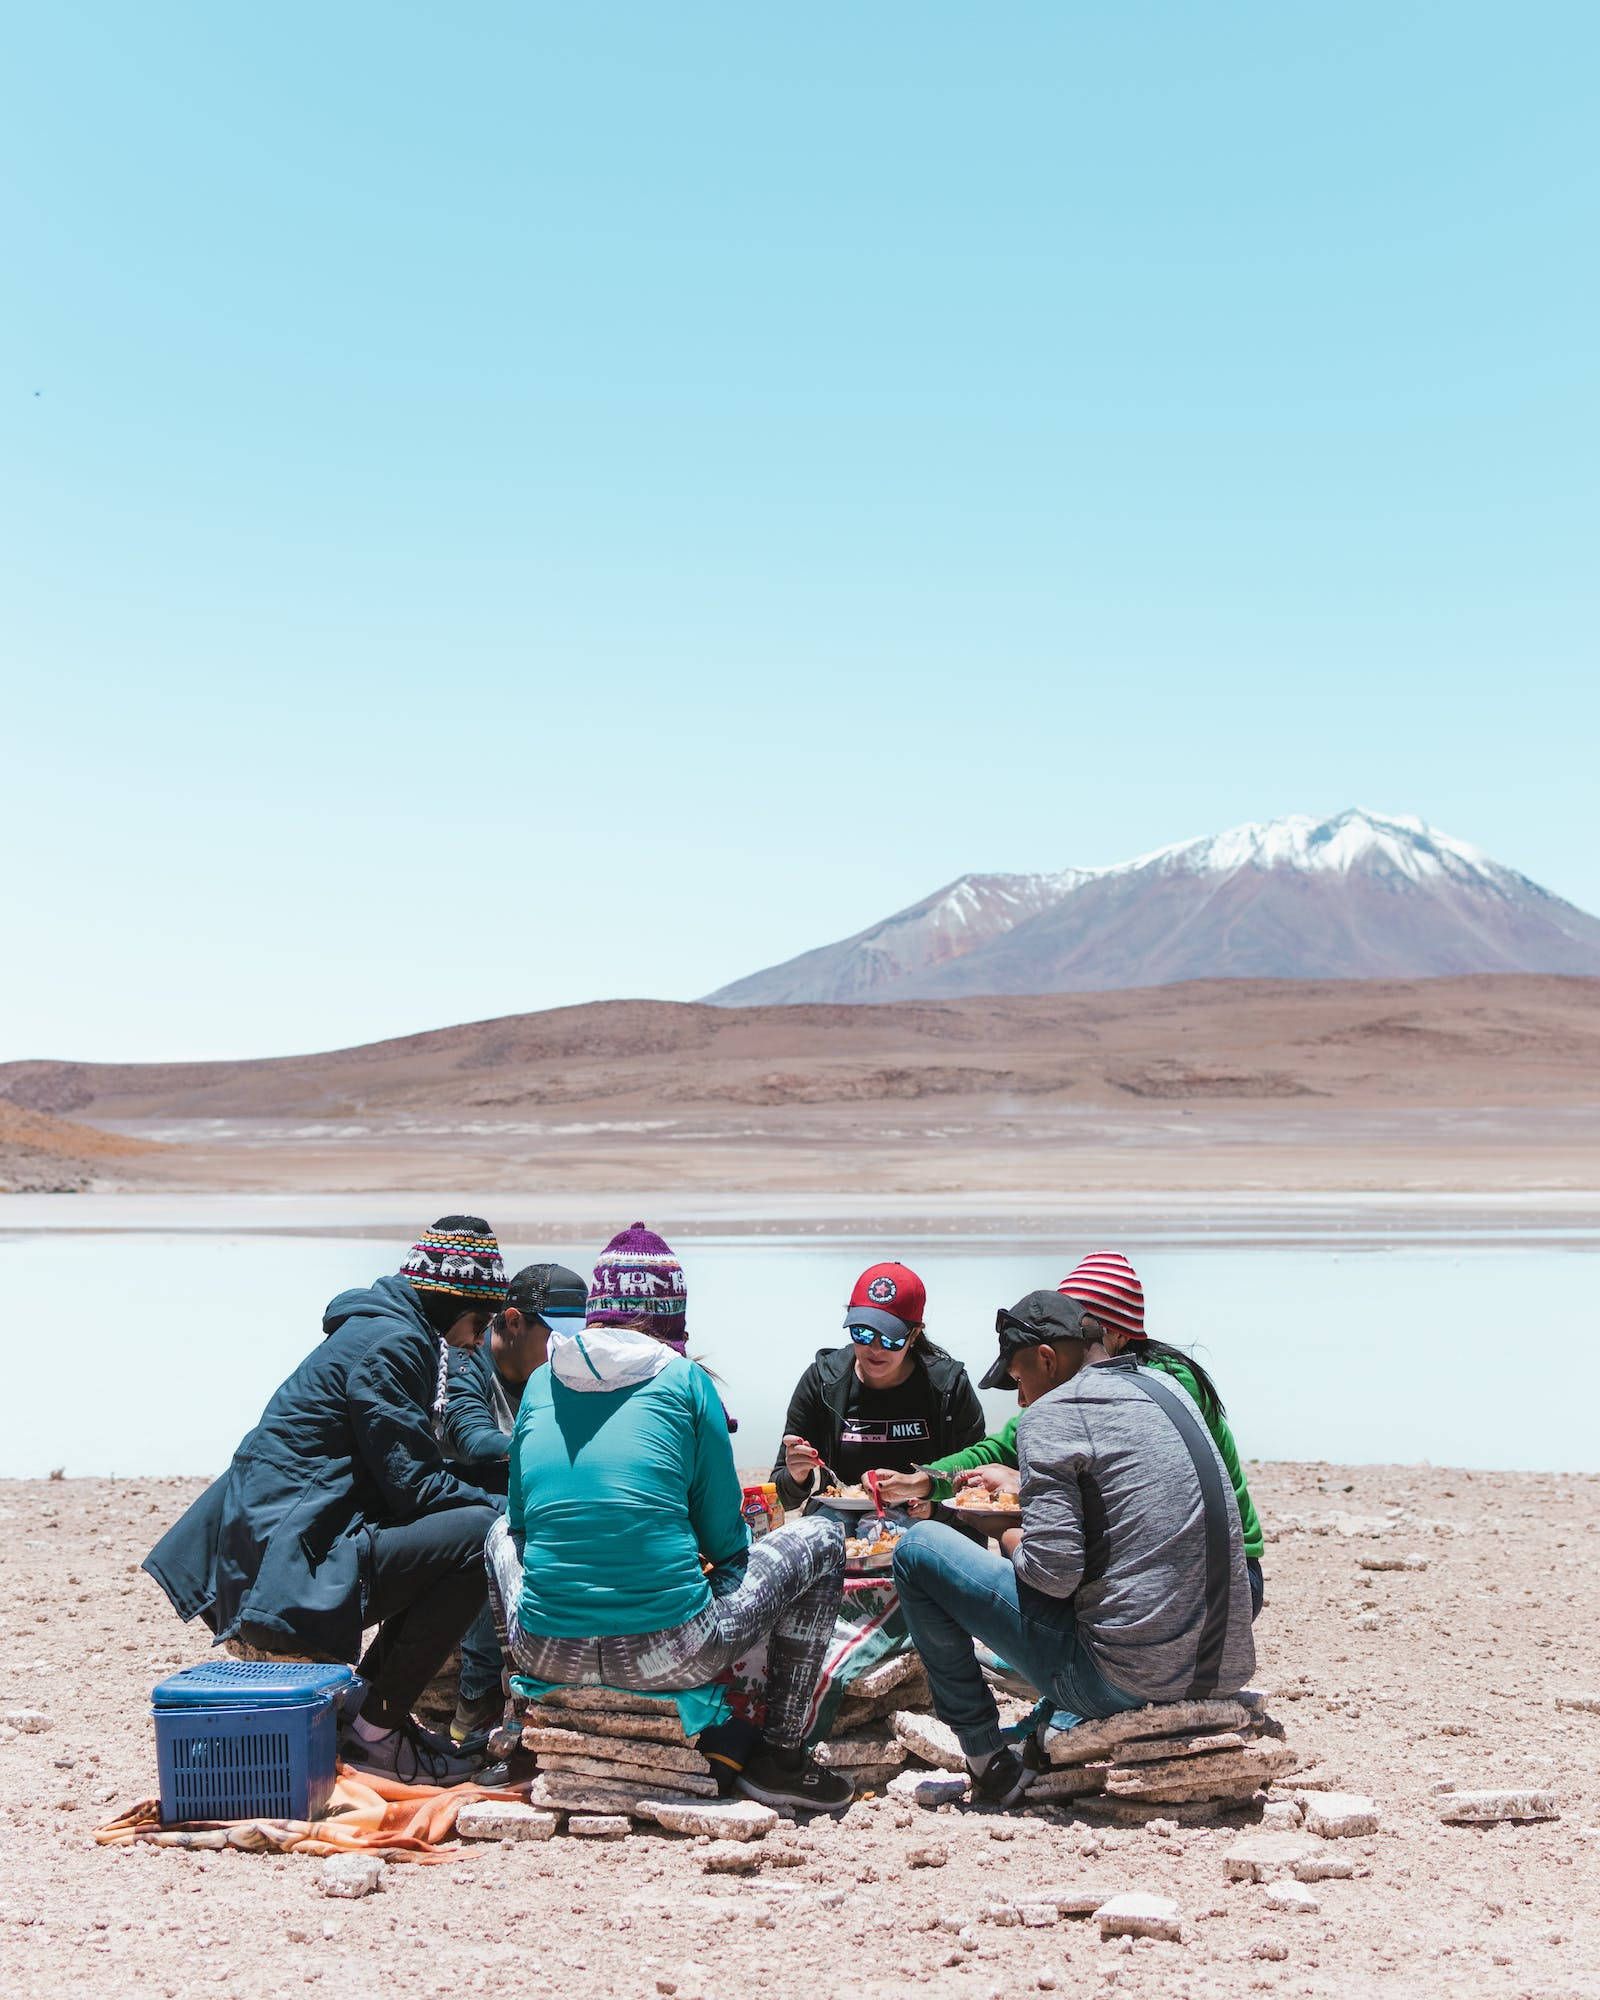 A group of people sitting around on the ground - Camping